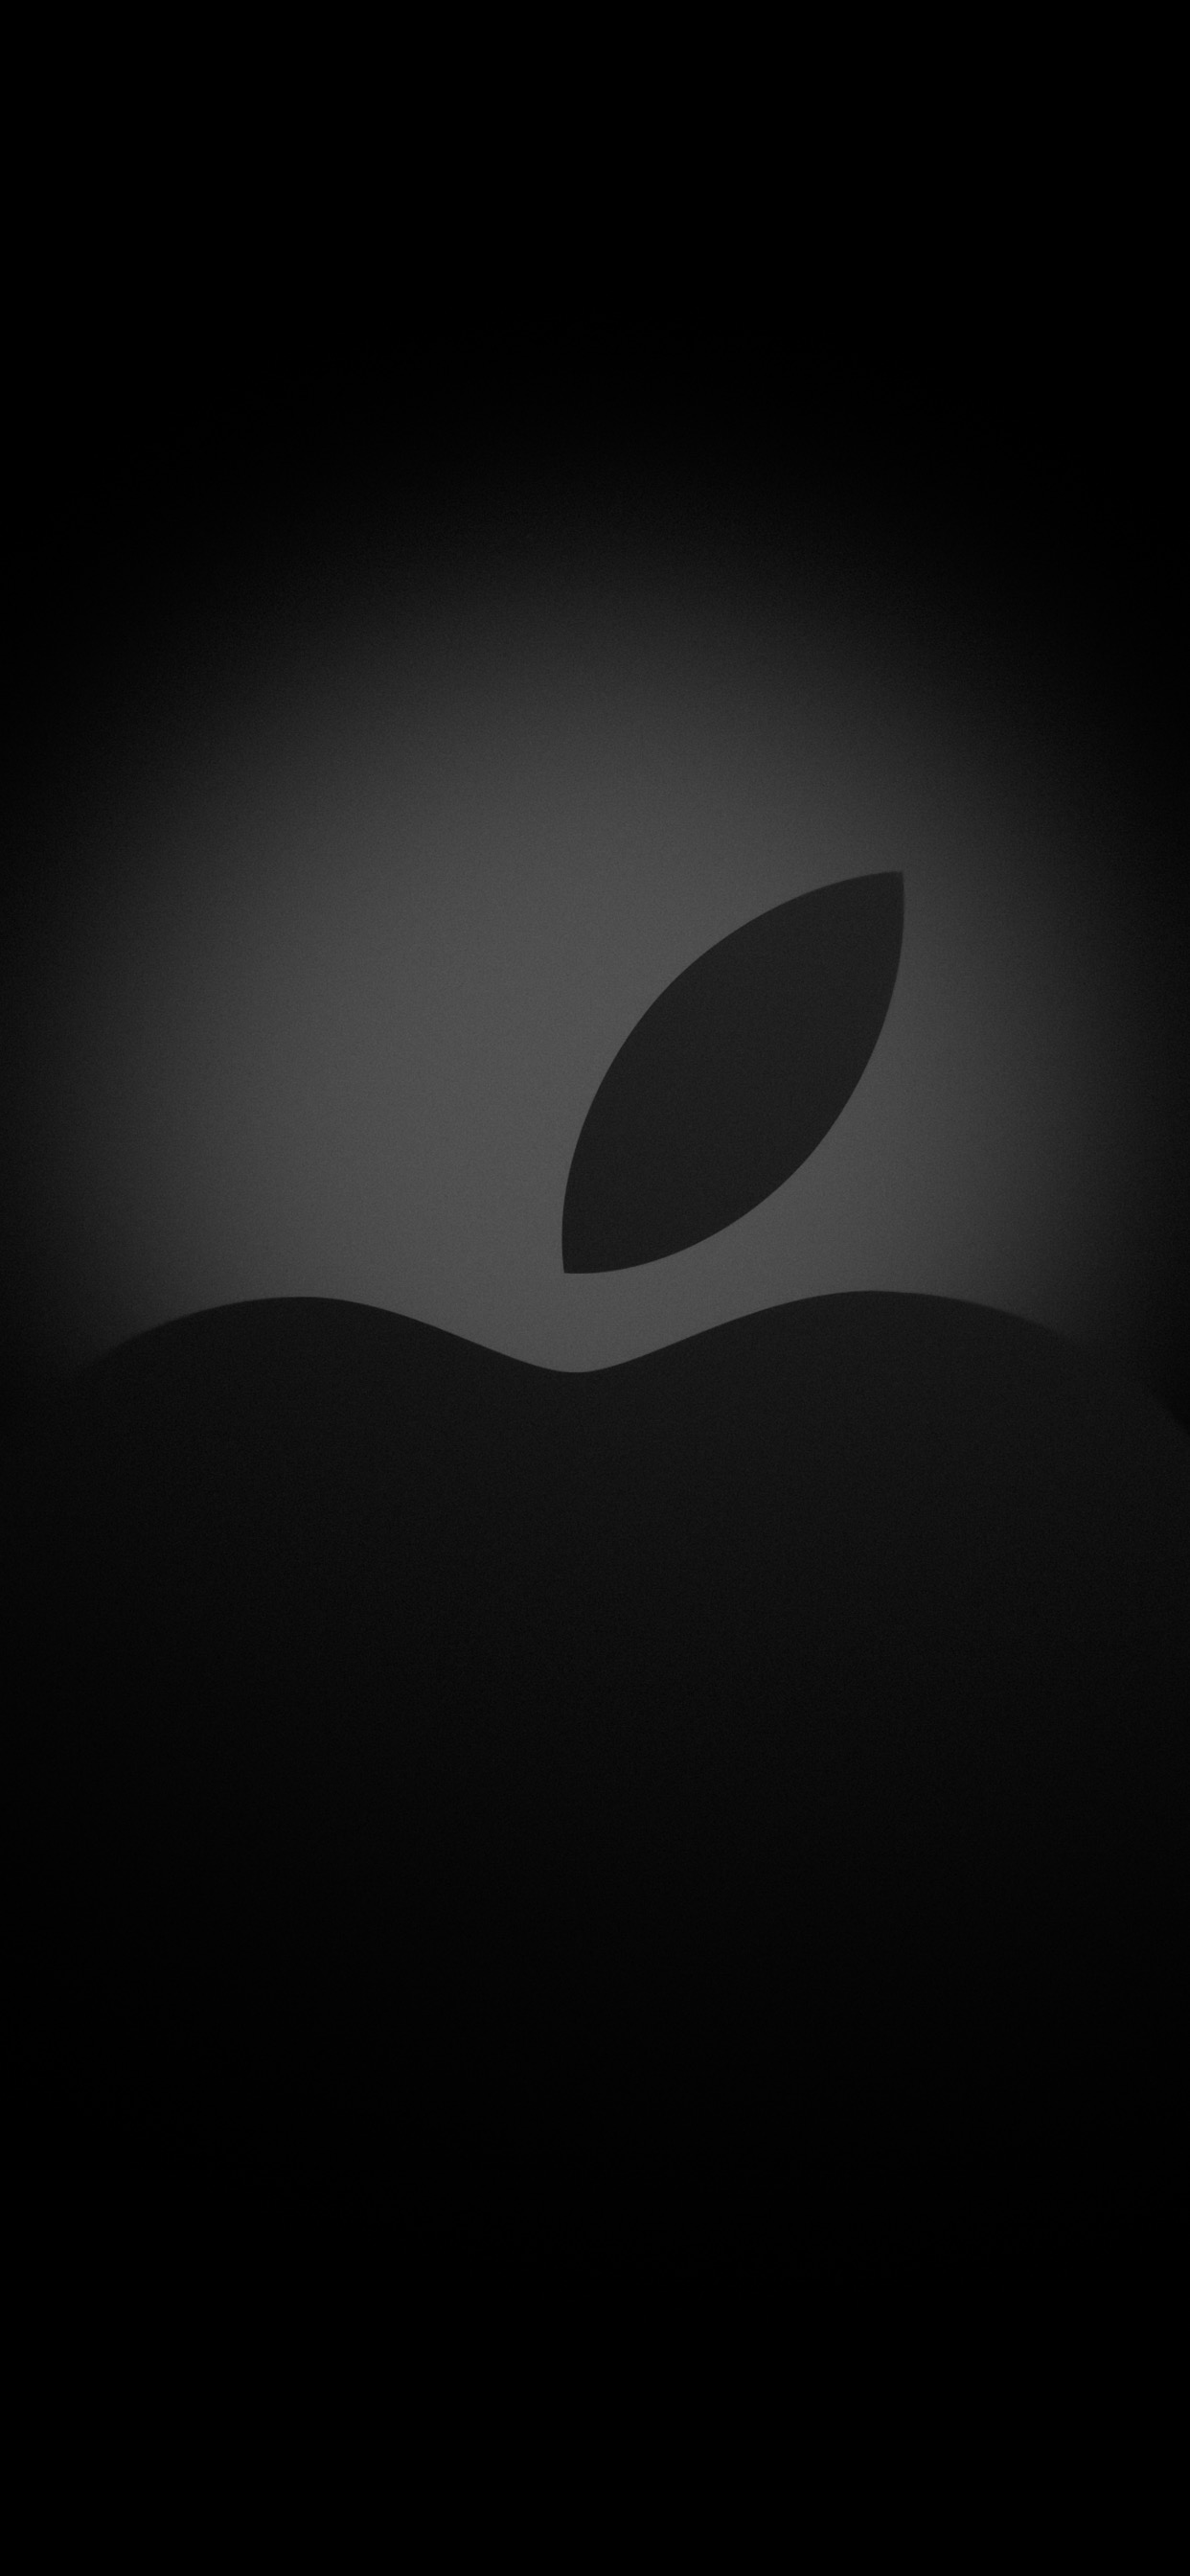 Apple's March 25th event Wallpaper for iPhone X, 6